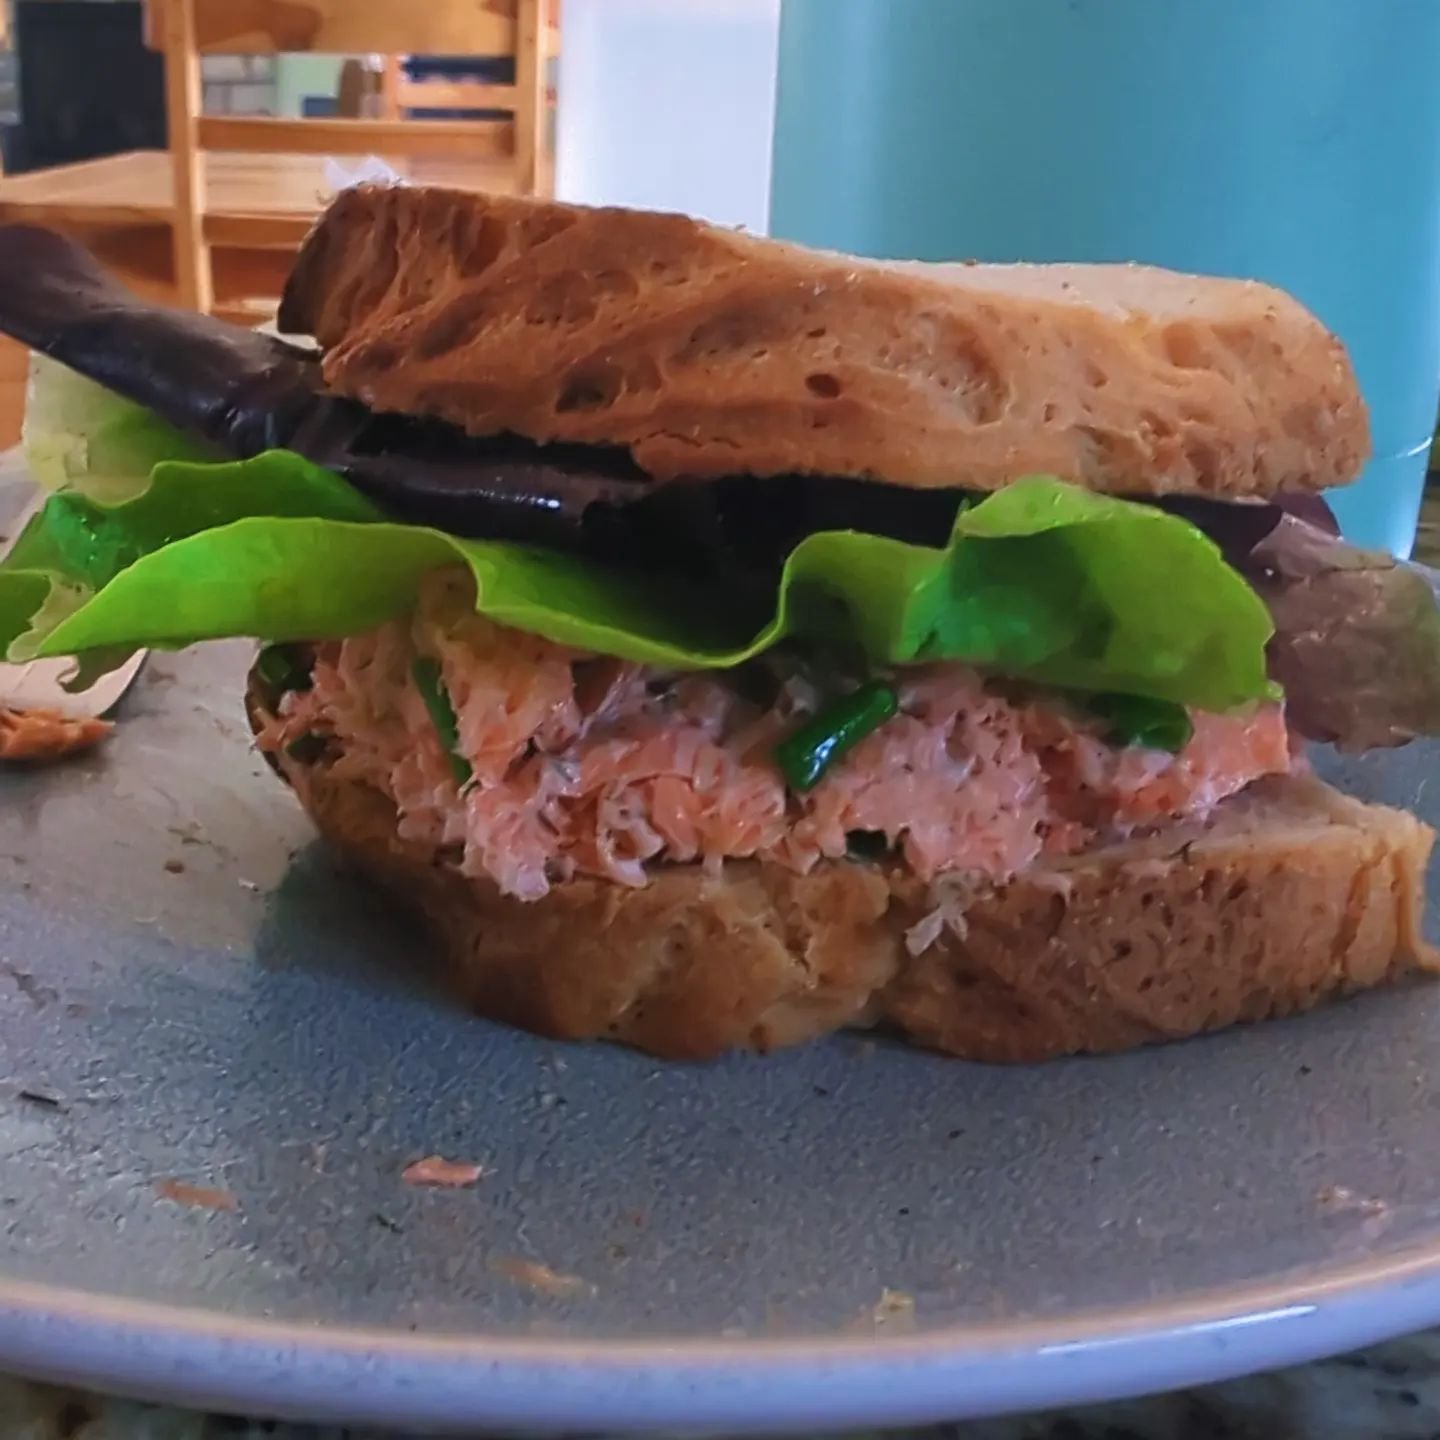 Vitamin L (Love) 
Lunch made with love for this healing body. 
Wild caught salmon (thank you @reubinpayne @alaskanwidespreadfishing) with chives and lettuce from the garden and my favorite GF bread @canyonglutenfree